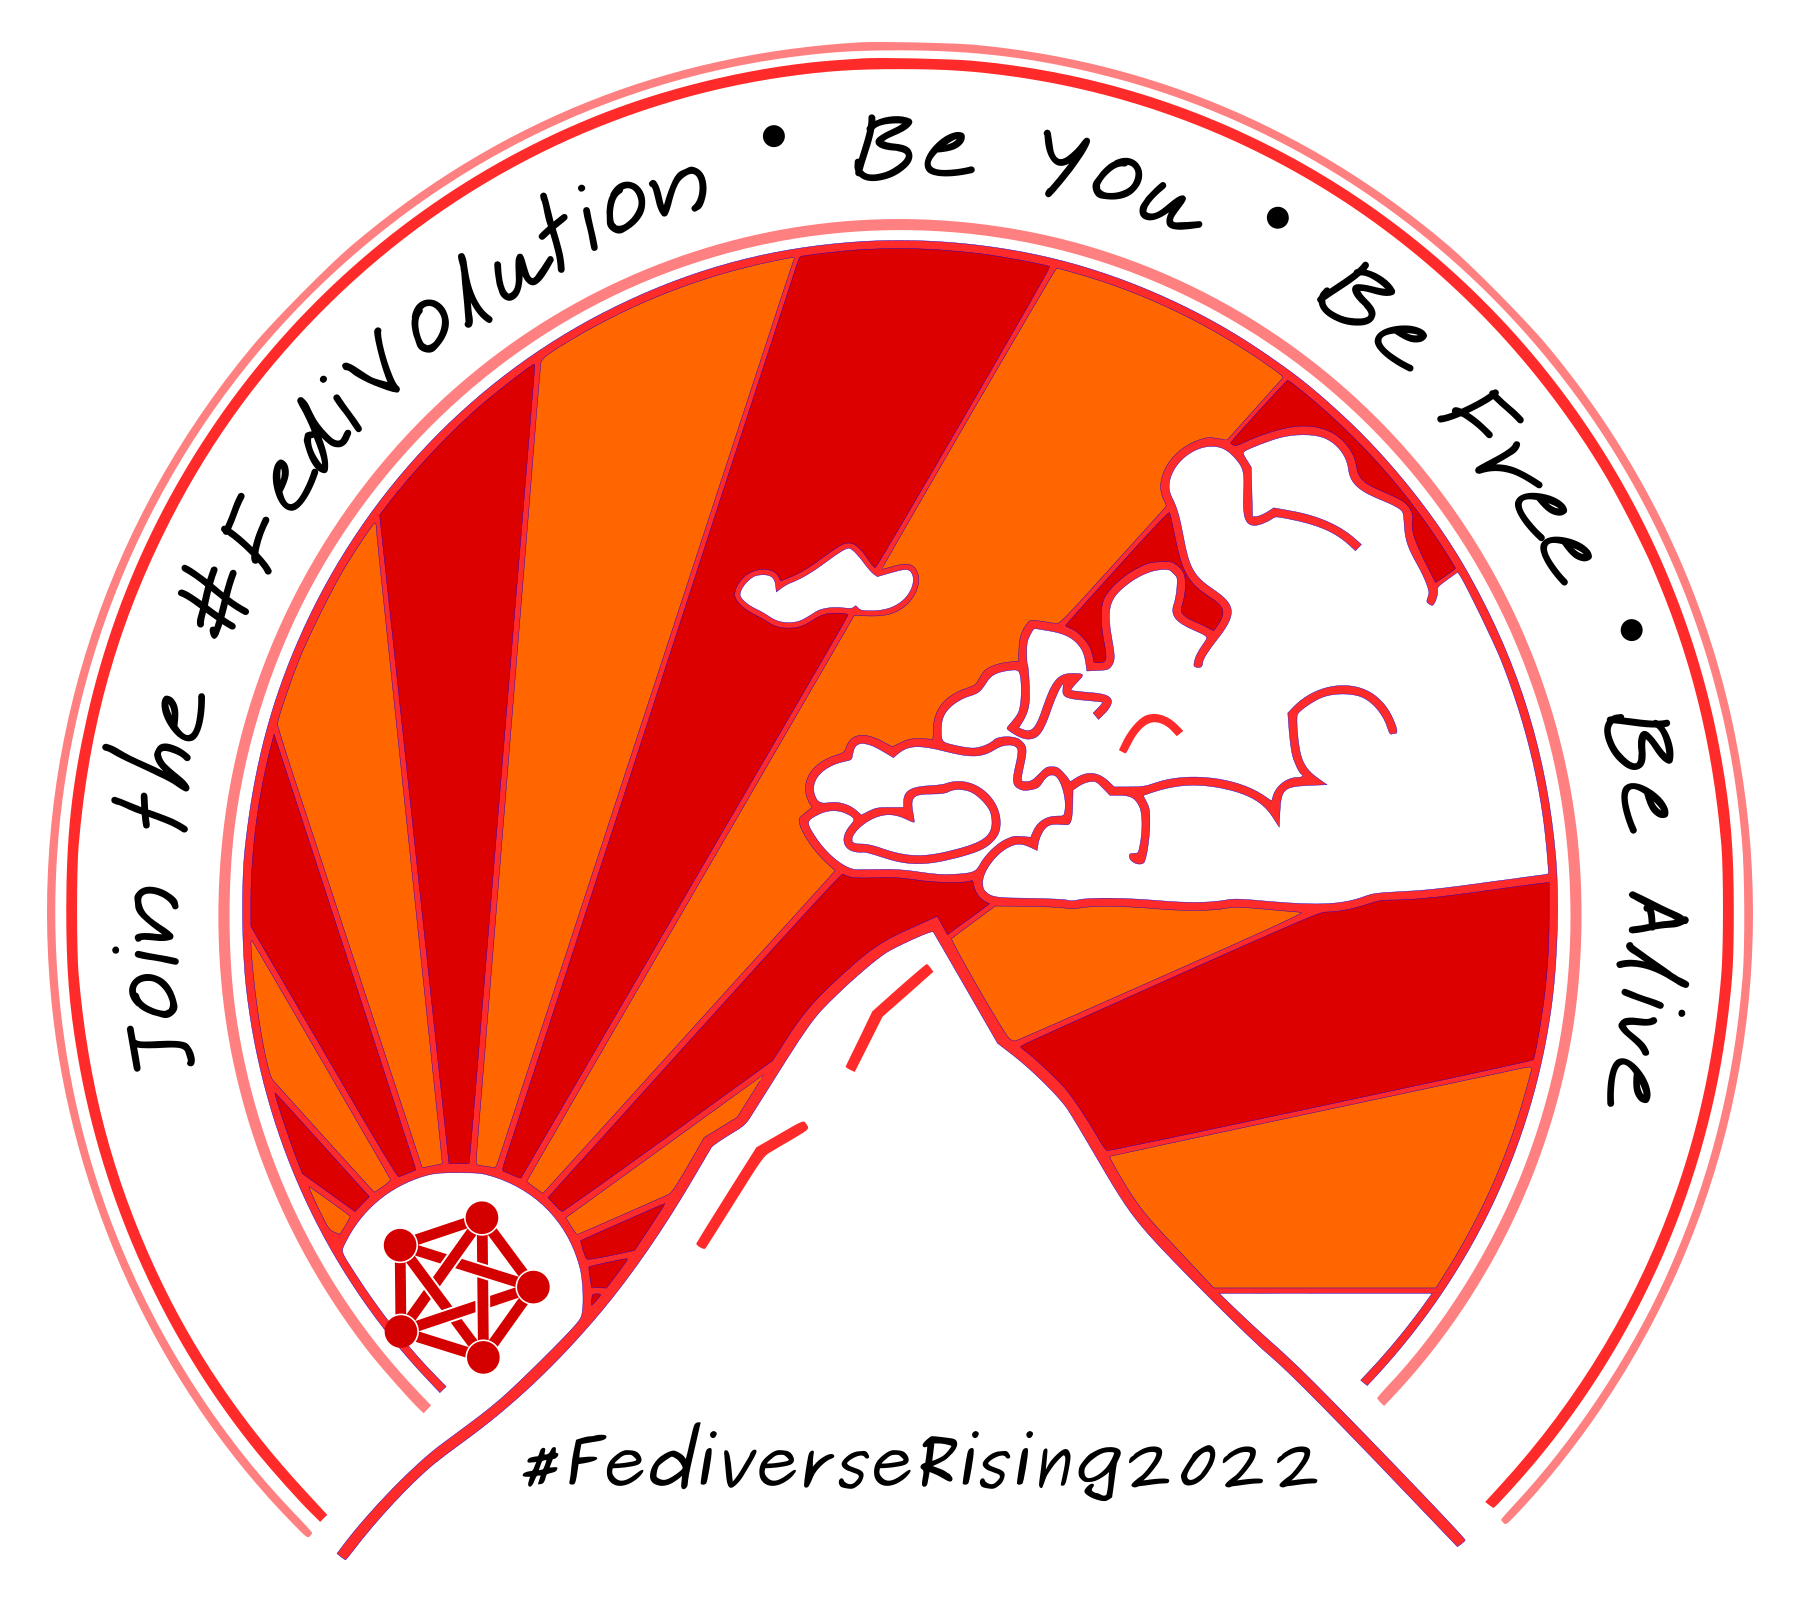 #FediverseRising2022, Join the #Fedivolution, Be You, Be Free, Be Alive